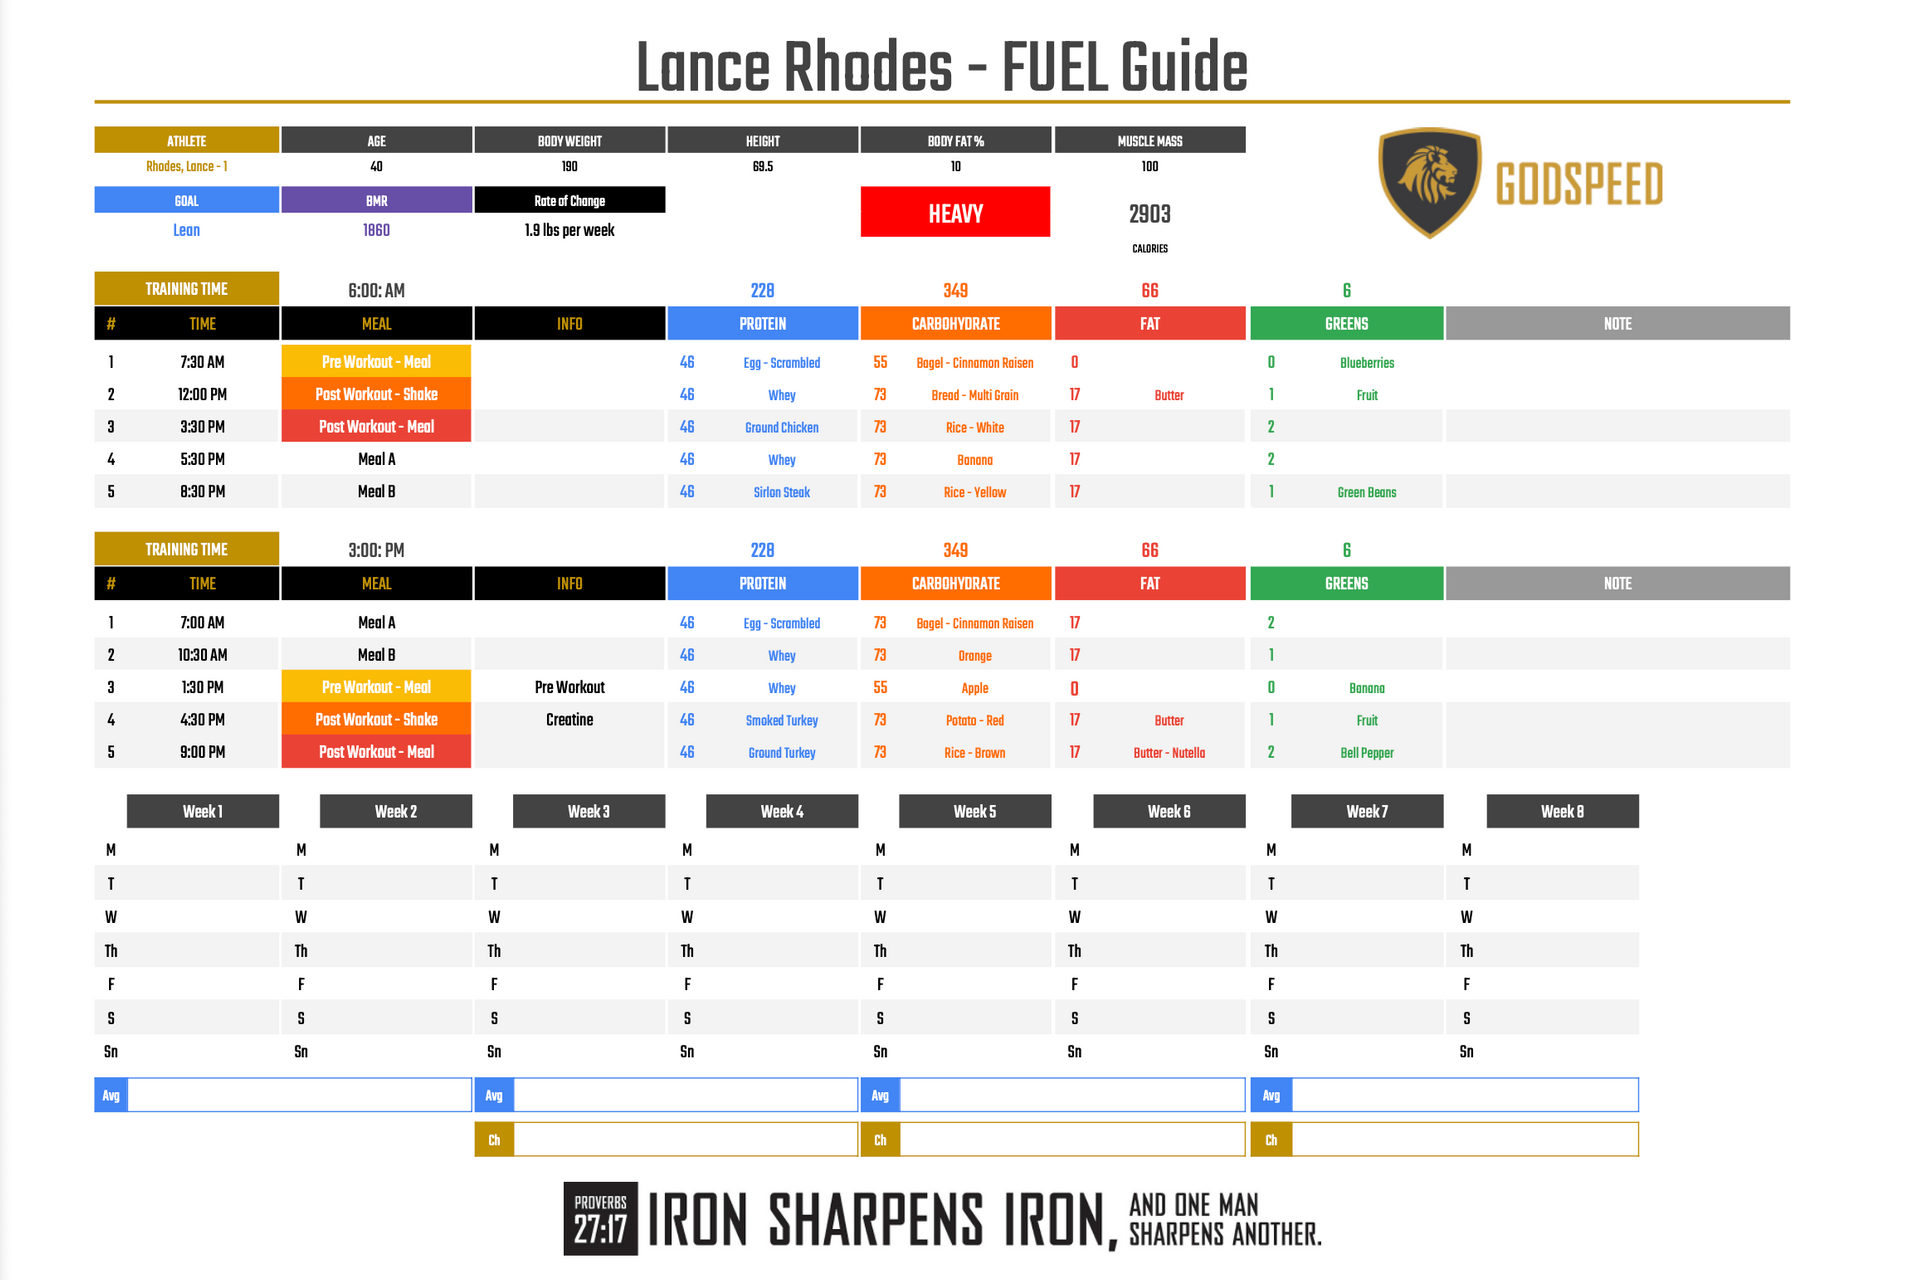 A fuel guide for lonce rhodes is shown on a white background